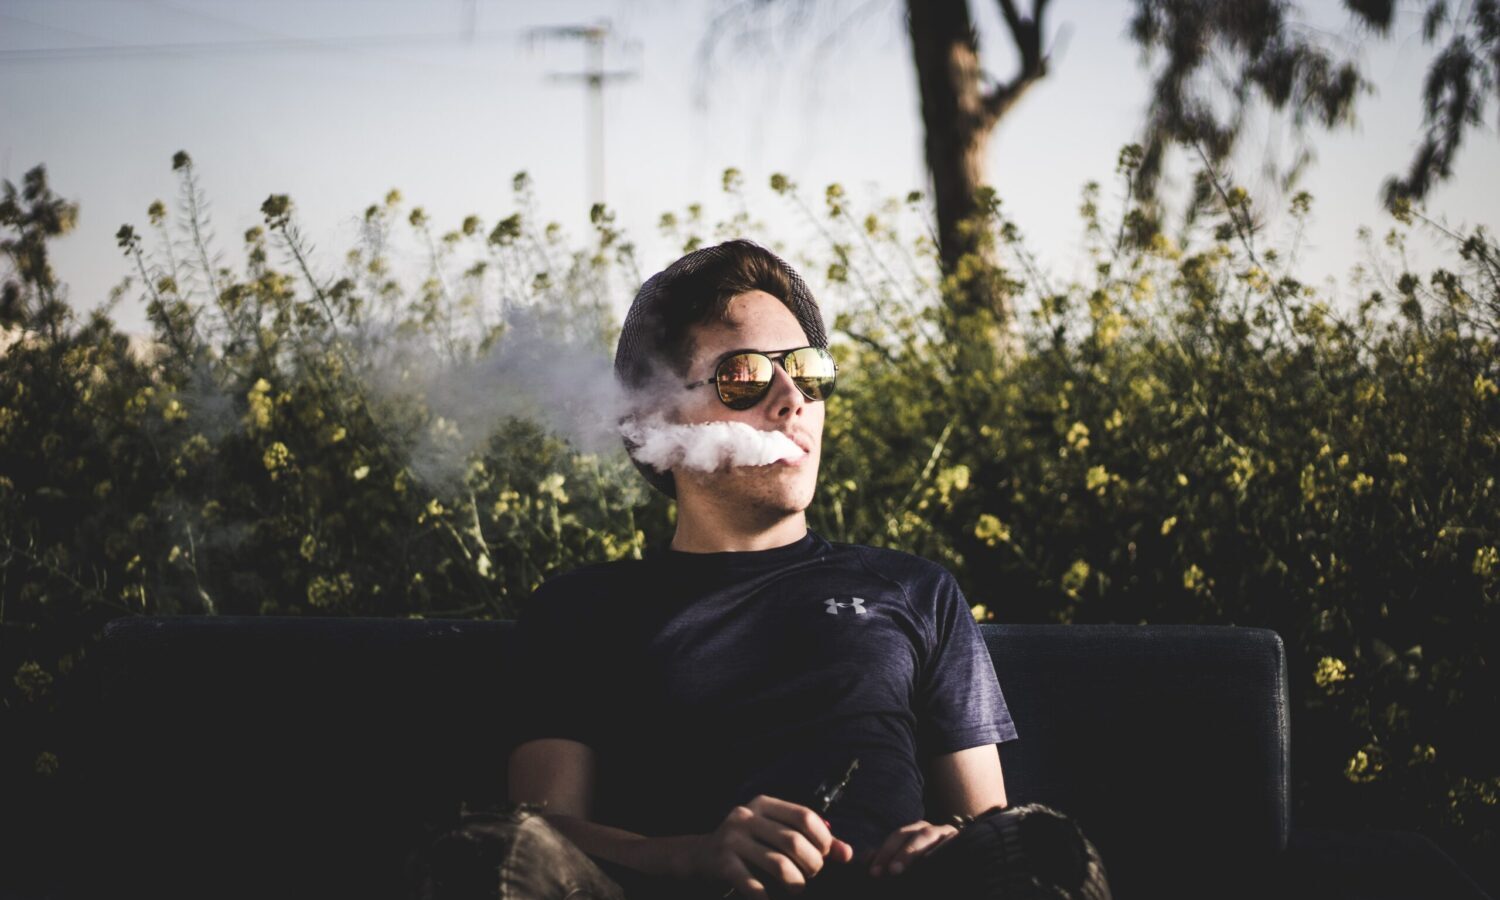 Men Who Vape Are More Likely To Have This Condition Than Non-Vapers